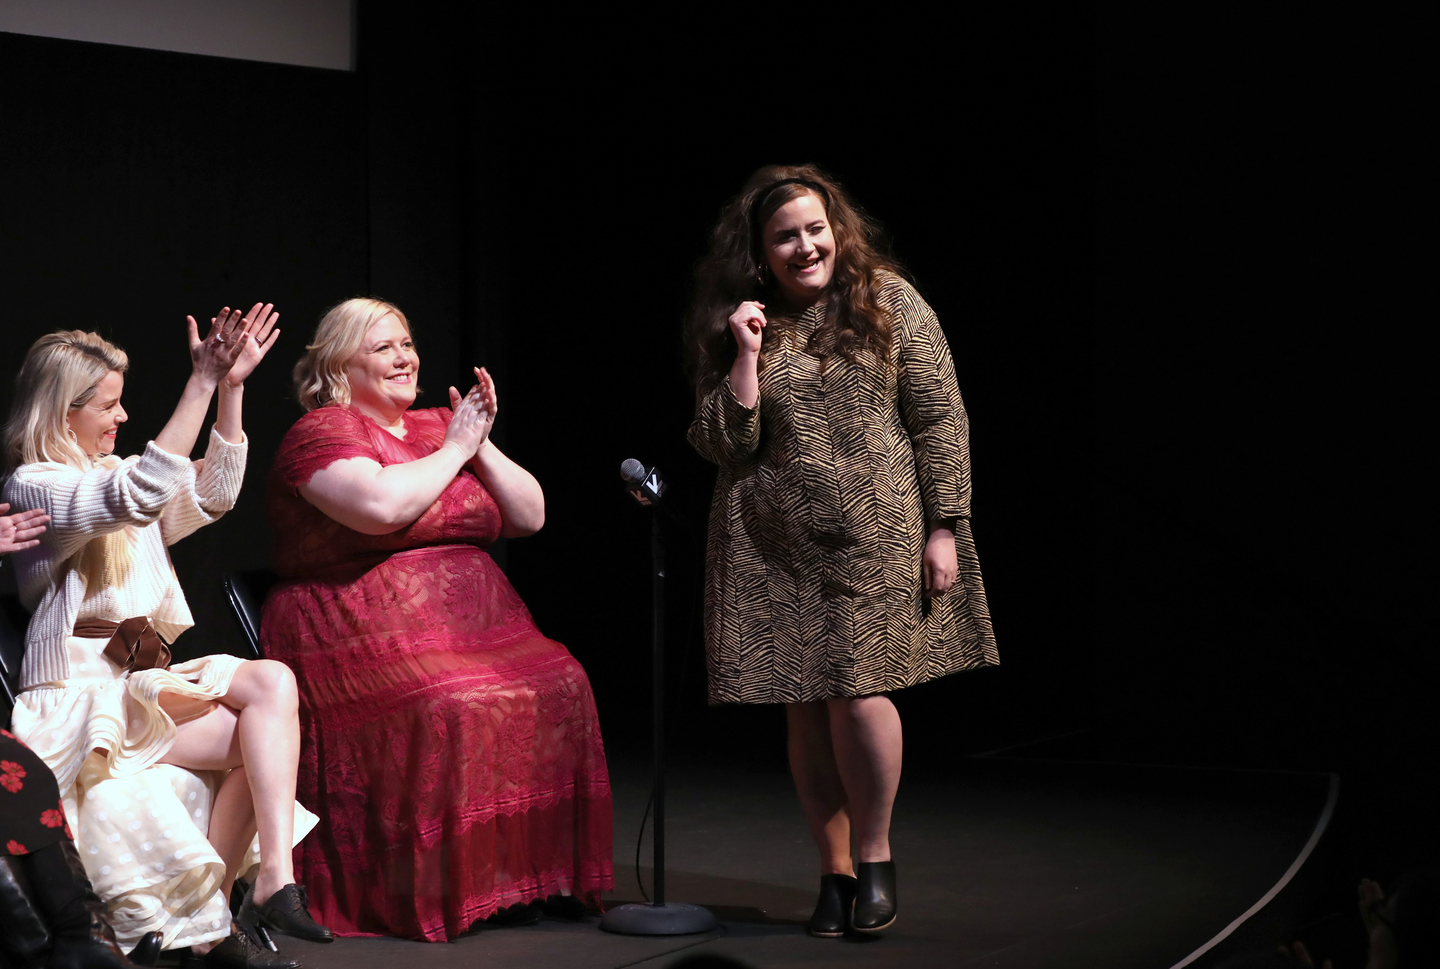 (L-R) Elizabeth Banks, Lindy West, and Aidy Bryant speak onstage at the Shrill premiere at the Stateside Theatre. Photo by Sean Mathis/Getty Images for SXSW